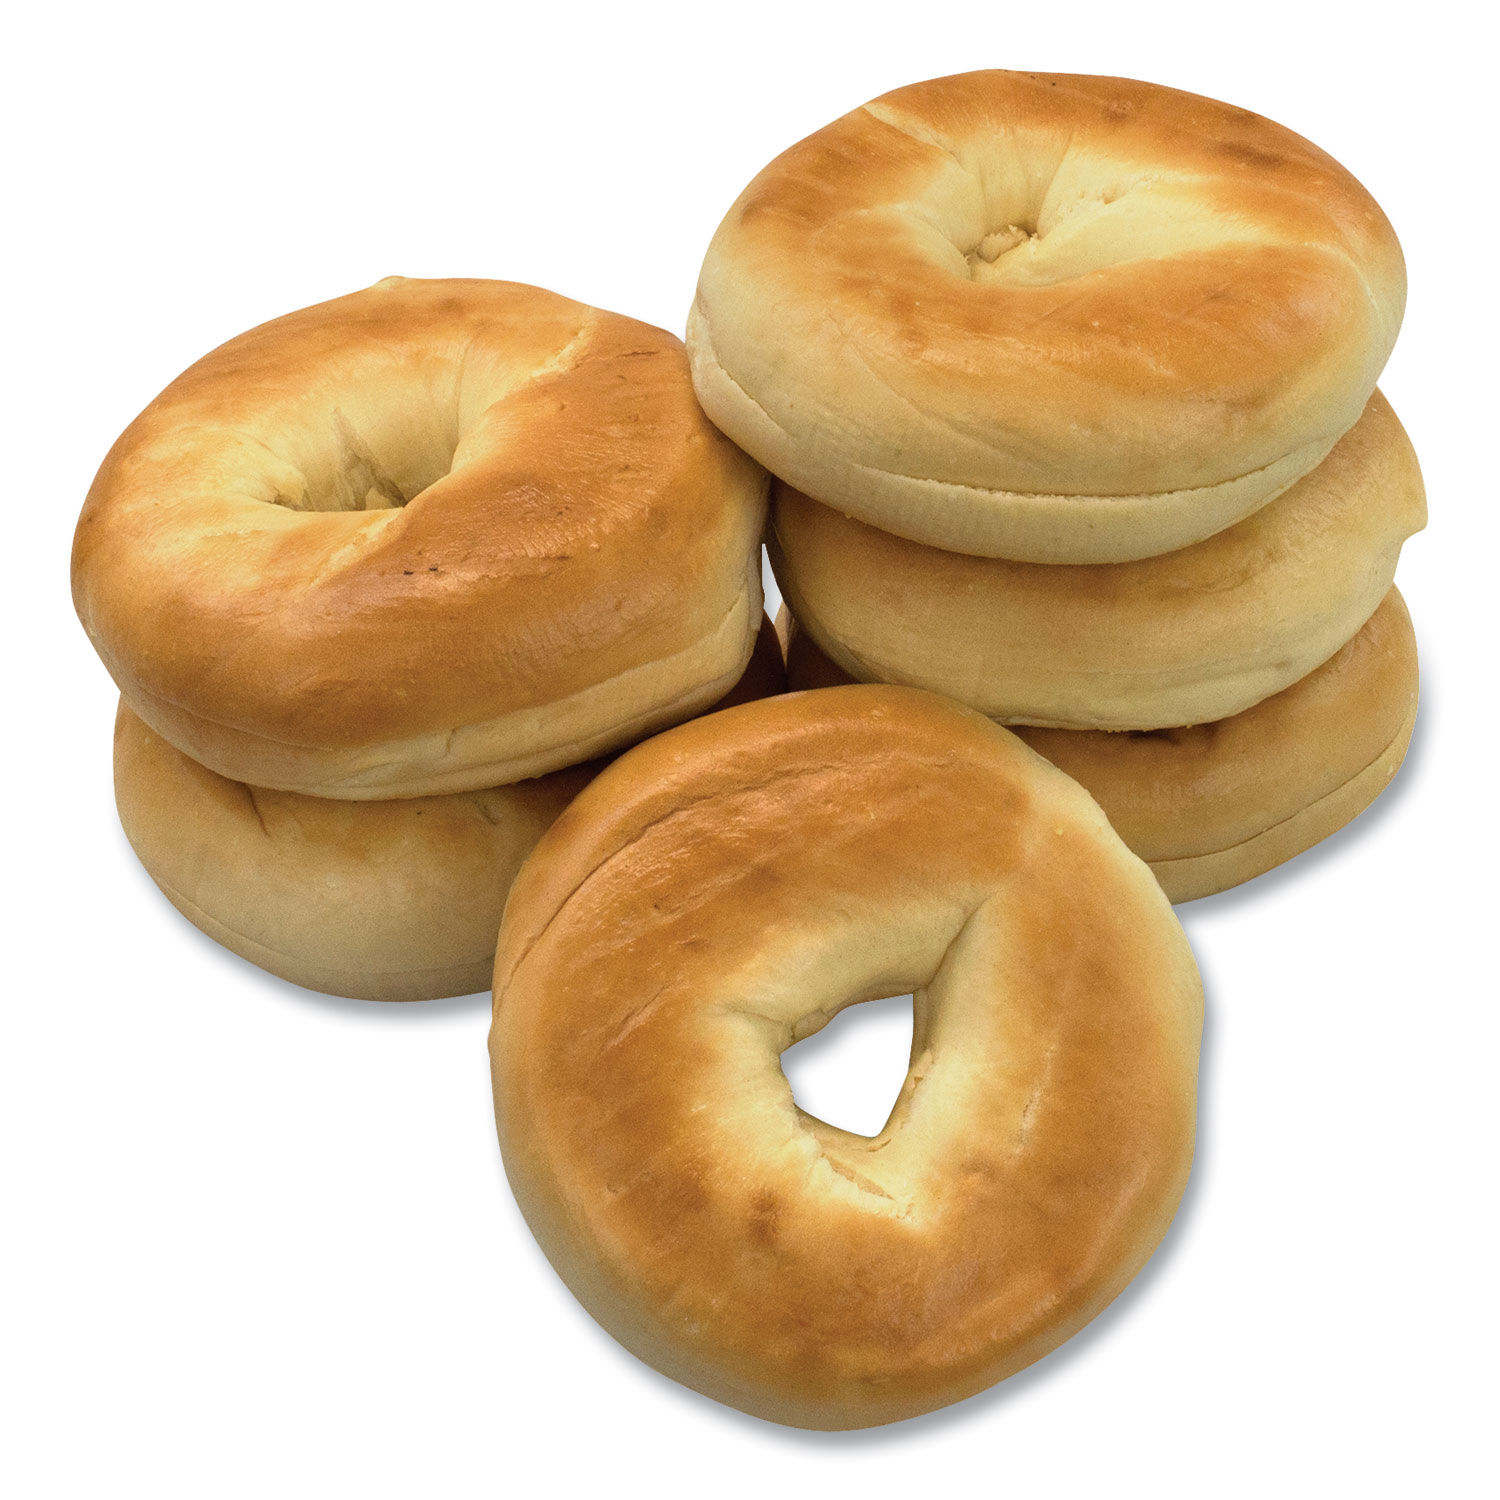  National Brand 172667 Fresh Plain Bagels, 6/Pack, Free Delivery in 1-4 Business Days (GRR90000074) 